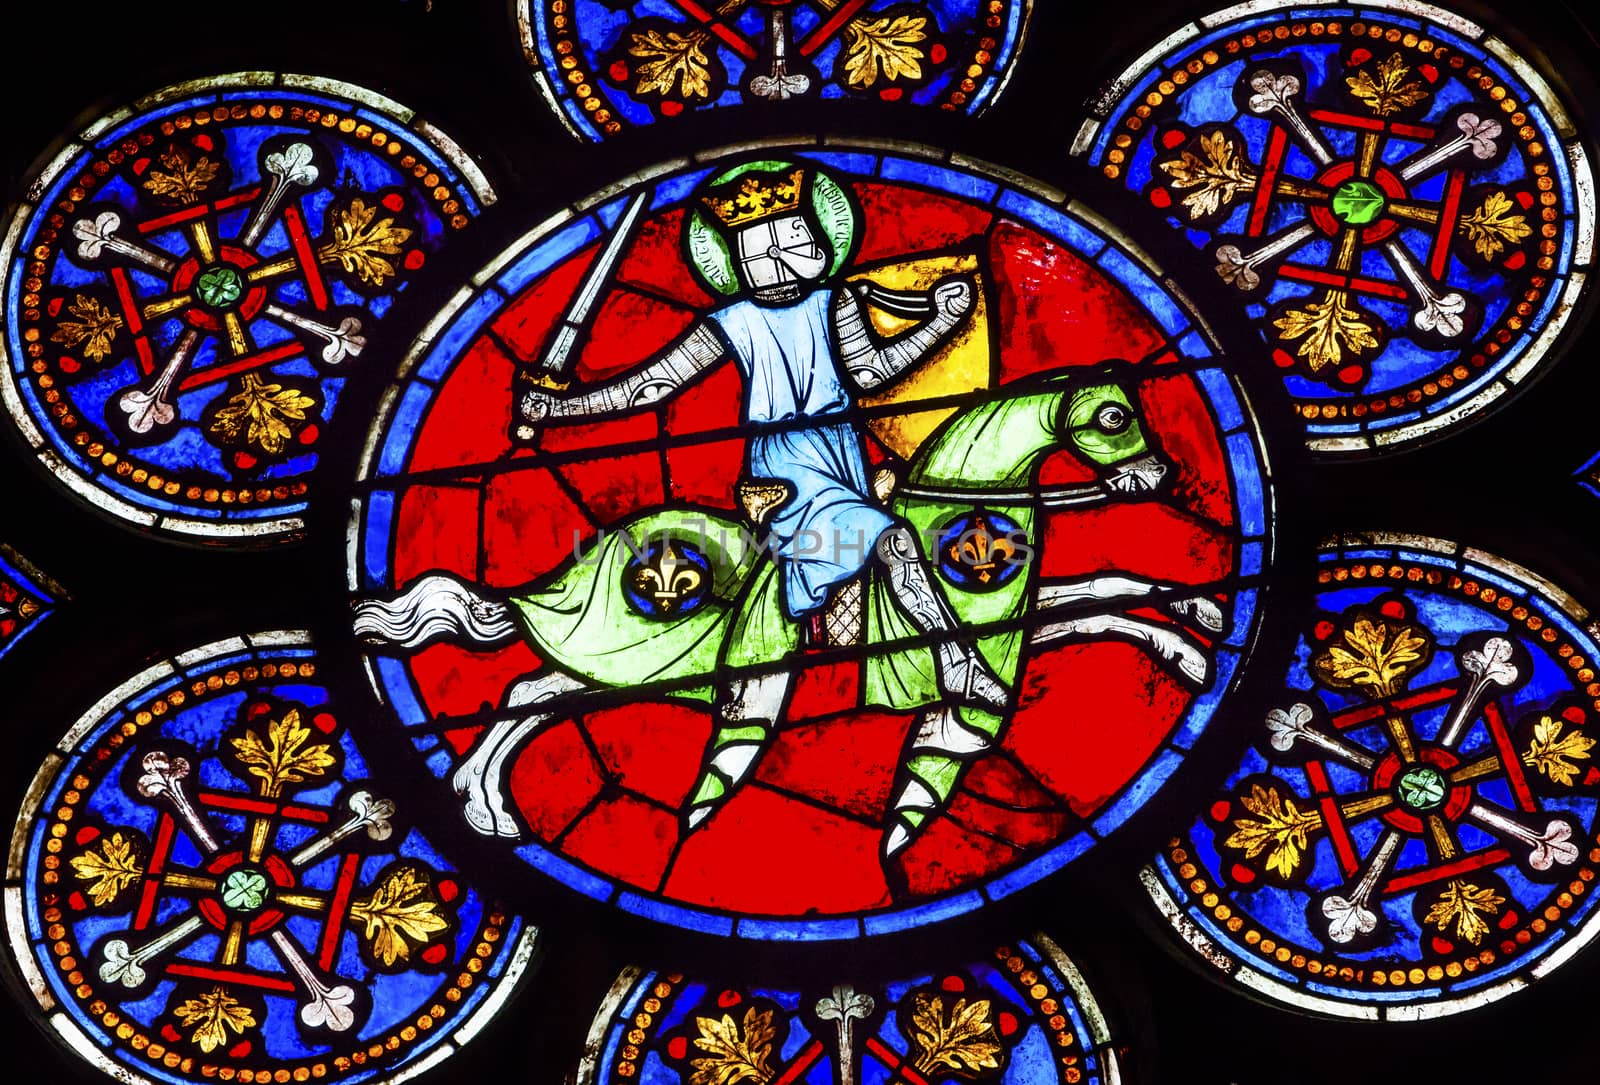 Armed Knight Sword Stained Glass Notre Dame Cathedral Paris by bill_perry